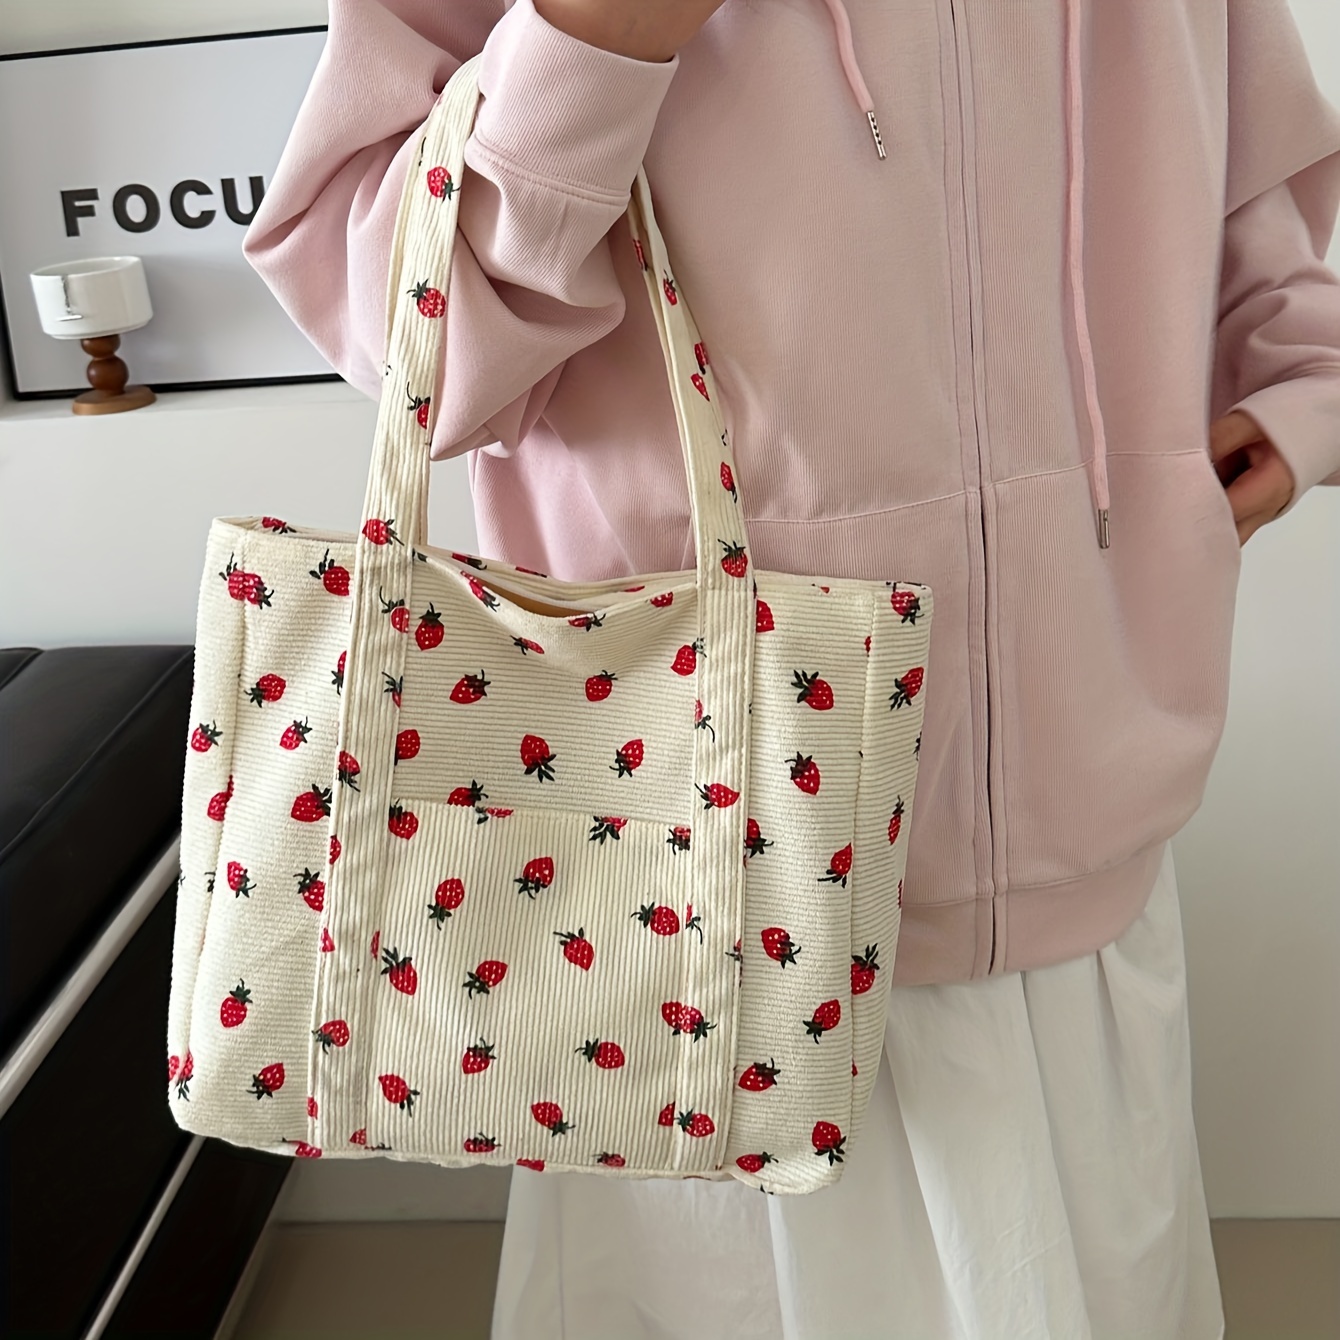 

Strawberry Pattern Tote Bag, Large Capacity Underarm Shoulder Bag, Chic Simple Nylon Shopping Tote